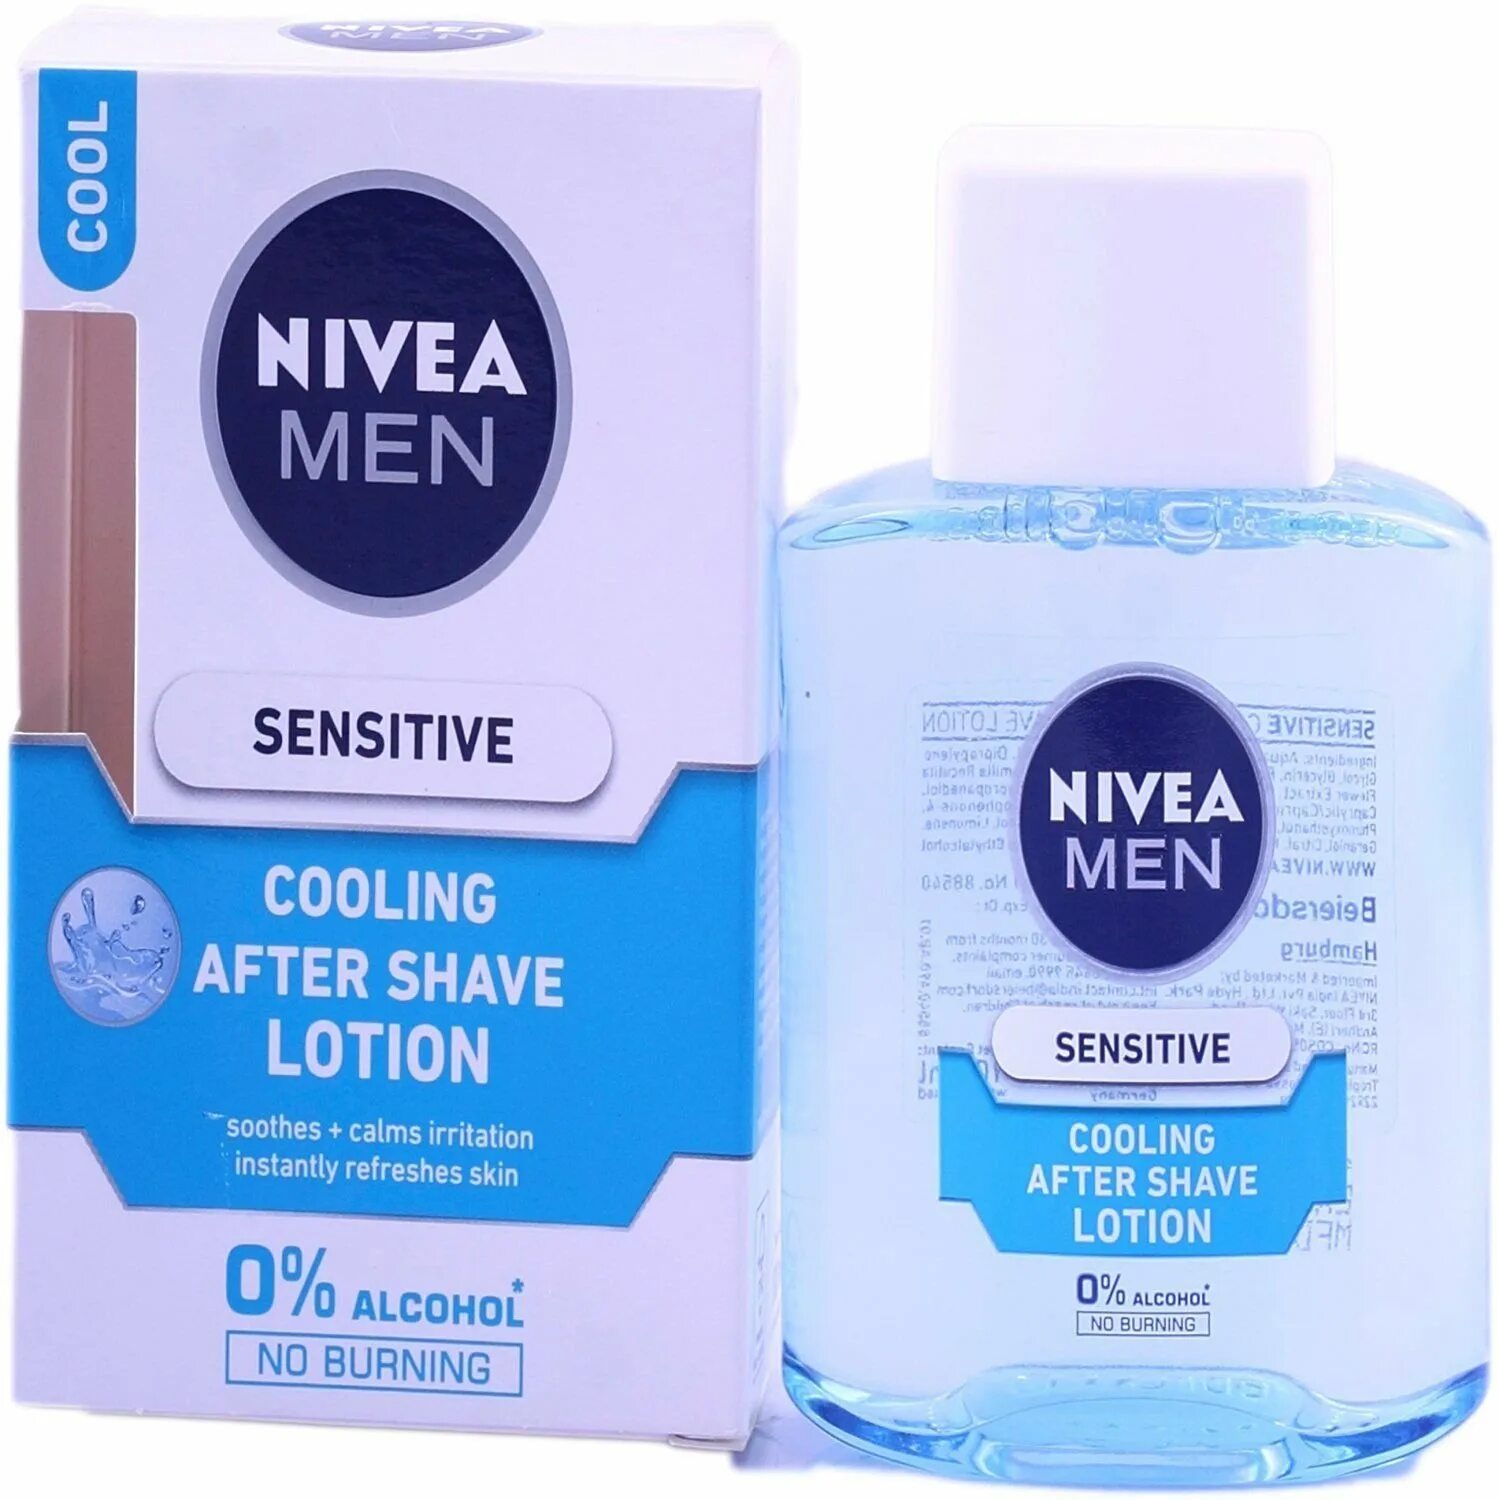 Nivea after Shave 100ml lation. Nivea after Shave 100ml lation Deep. Сенситив мен после бритья. Nivea after Shave 100ml lation protect Care. Нивея мен после бритья